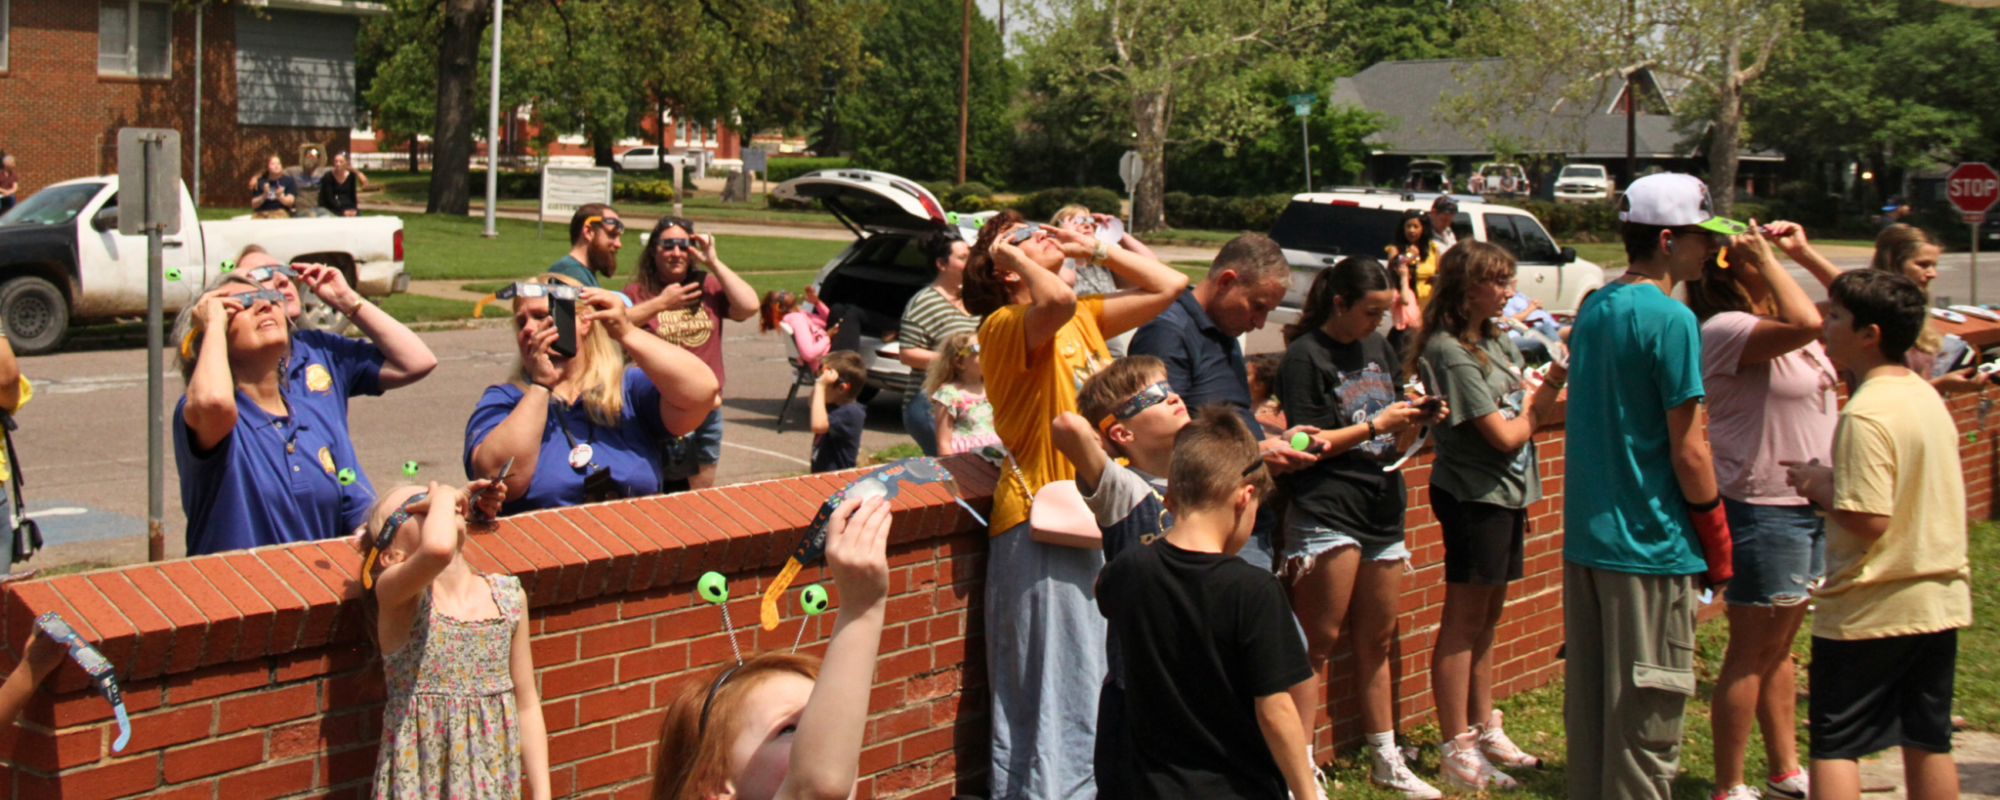 People standing by a brick wall along a street look at the sun through eclipse glasses